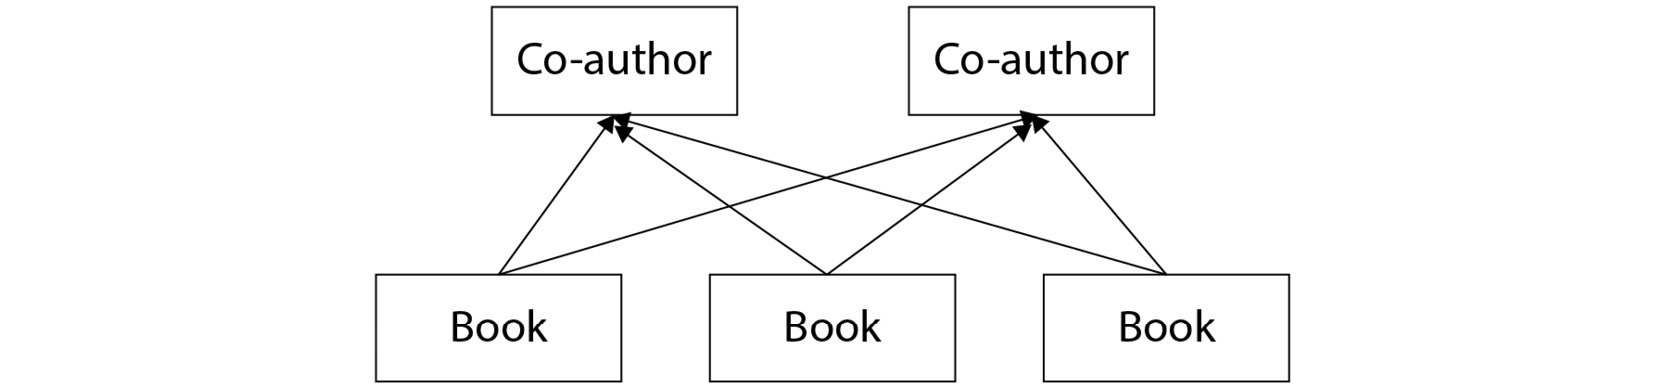 Figure 2.15: Many-to-many relationship between books and co-authors
